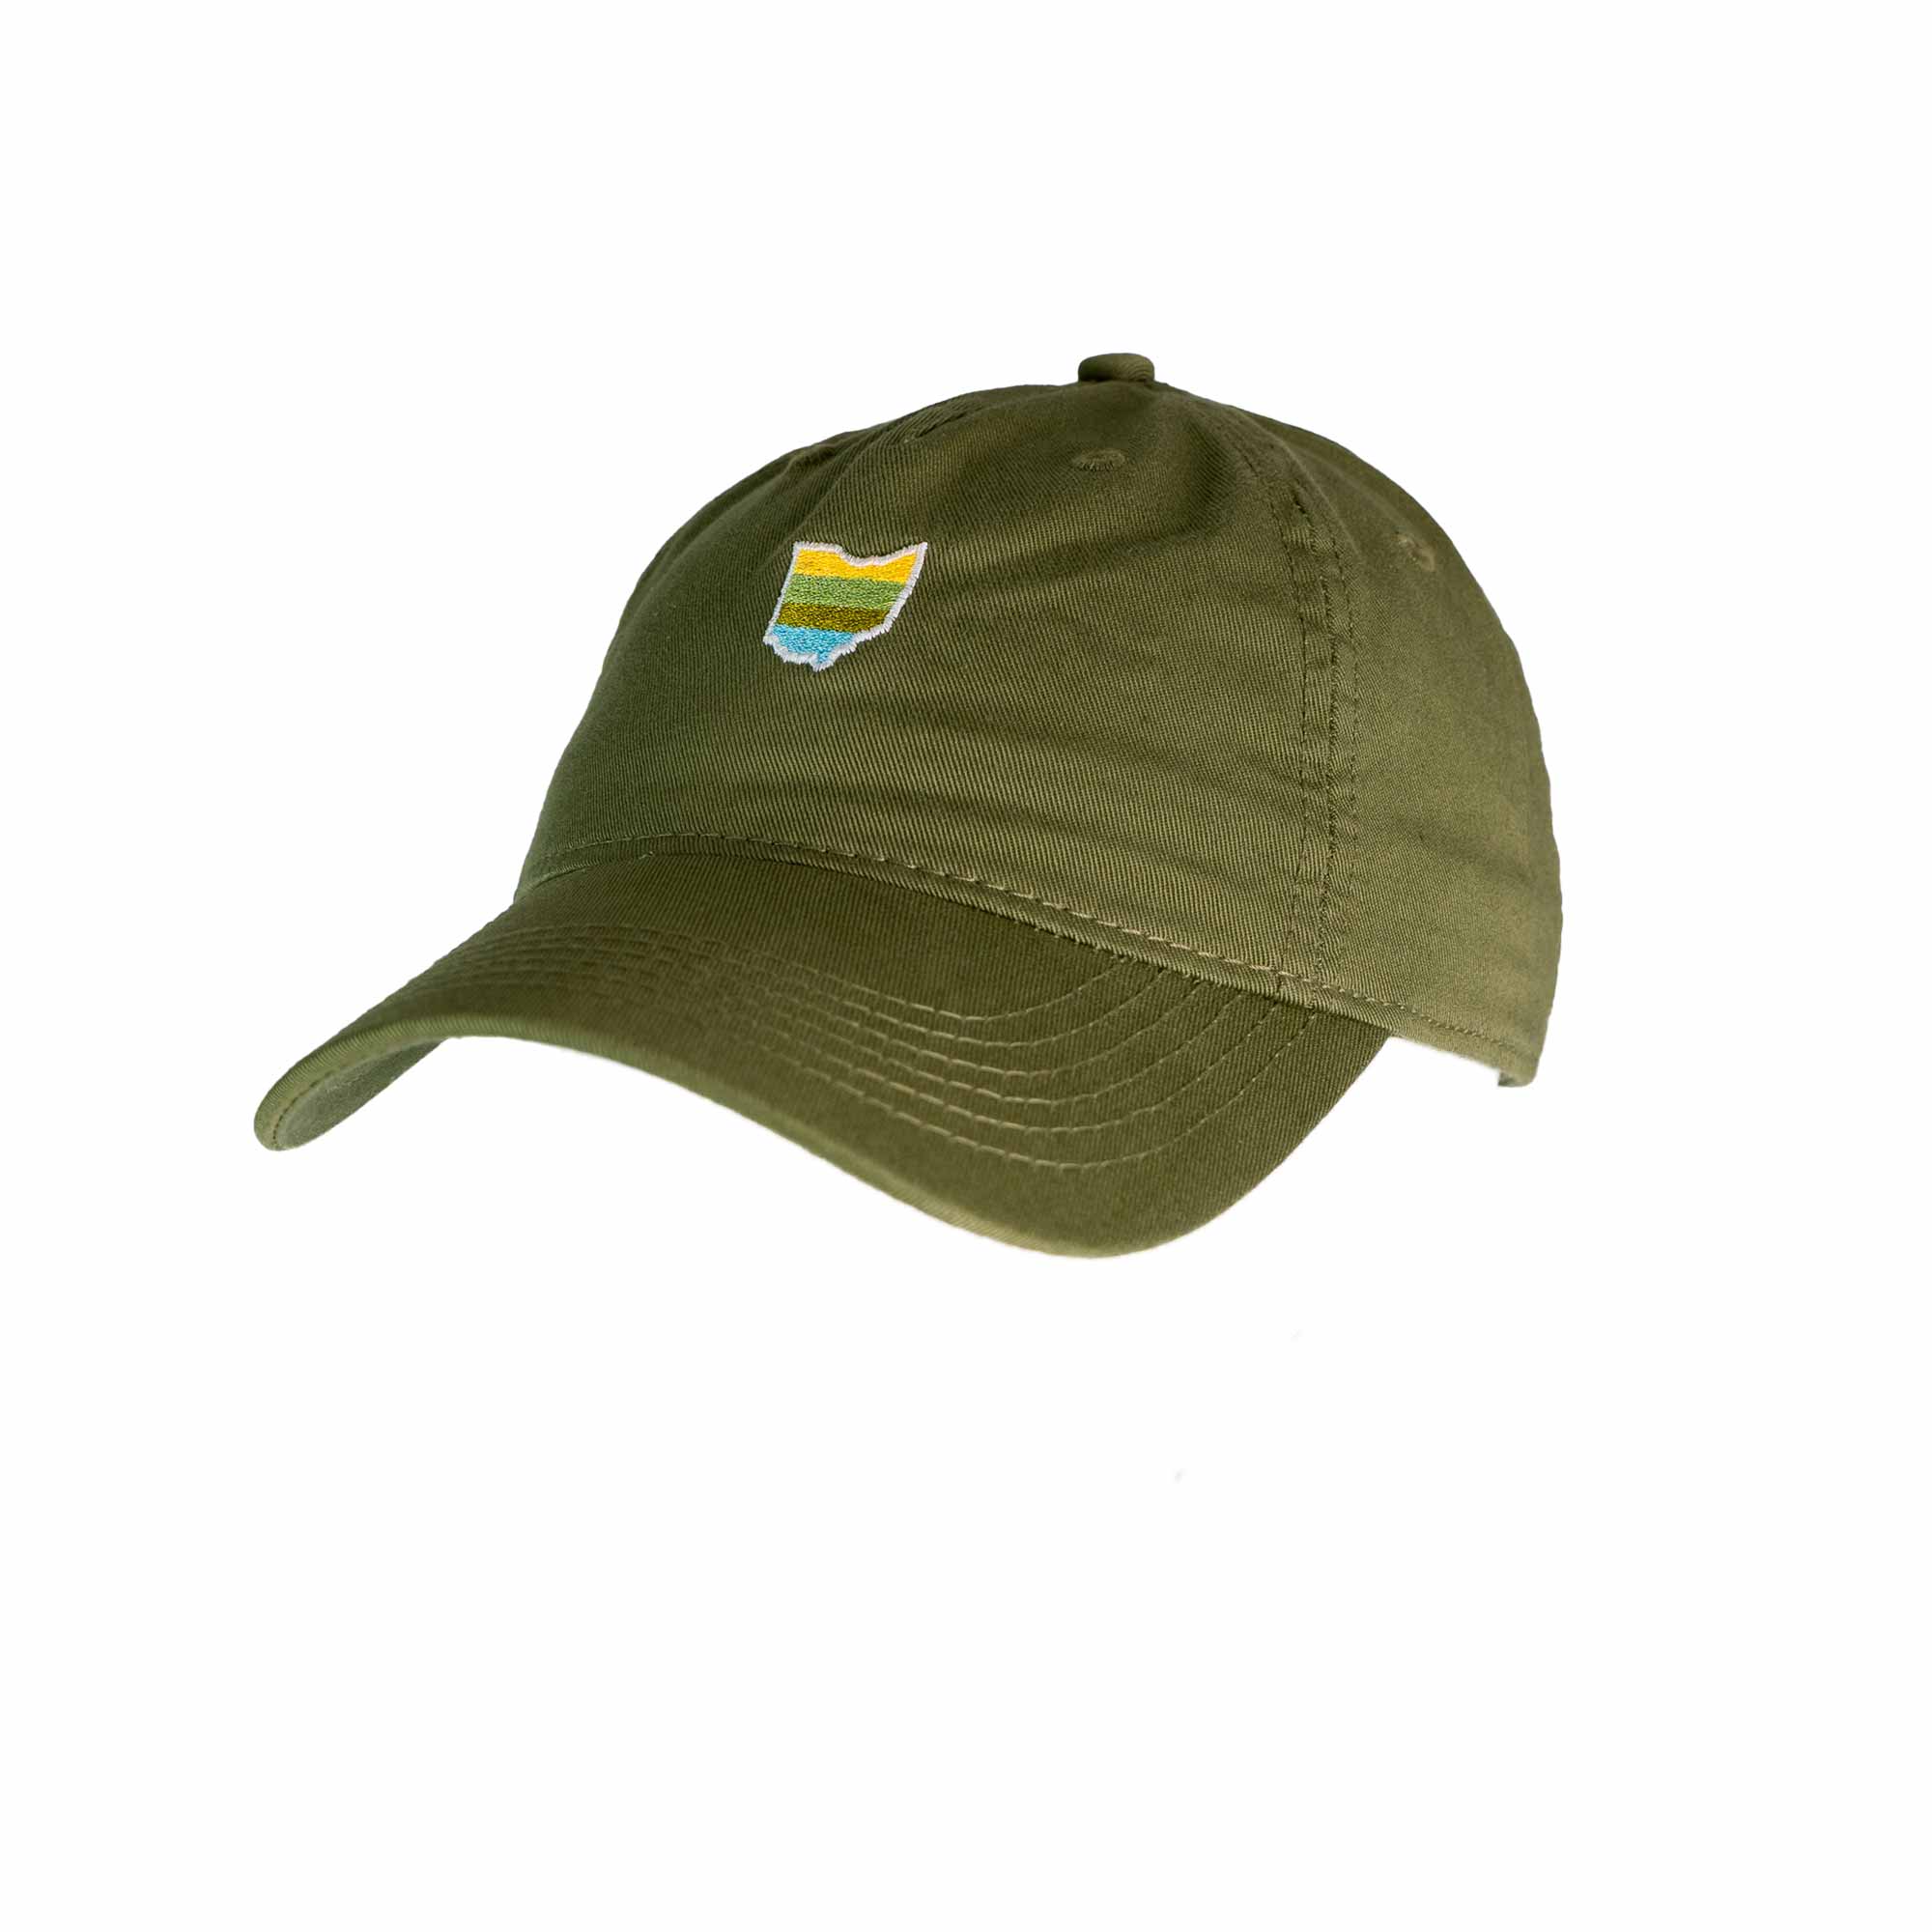 Scioto Made Ohio dad hat is built for comfort and style.  Embroidered Ohio on the front features our Scioto Made stripes that represent our passion for the outdoors. 100% Organic Cotton in Olive green. 